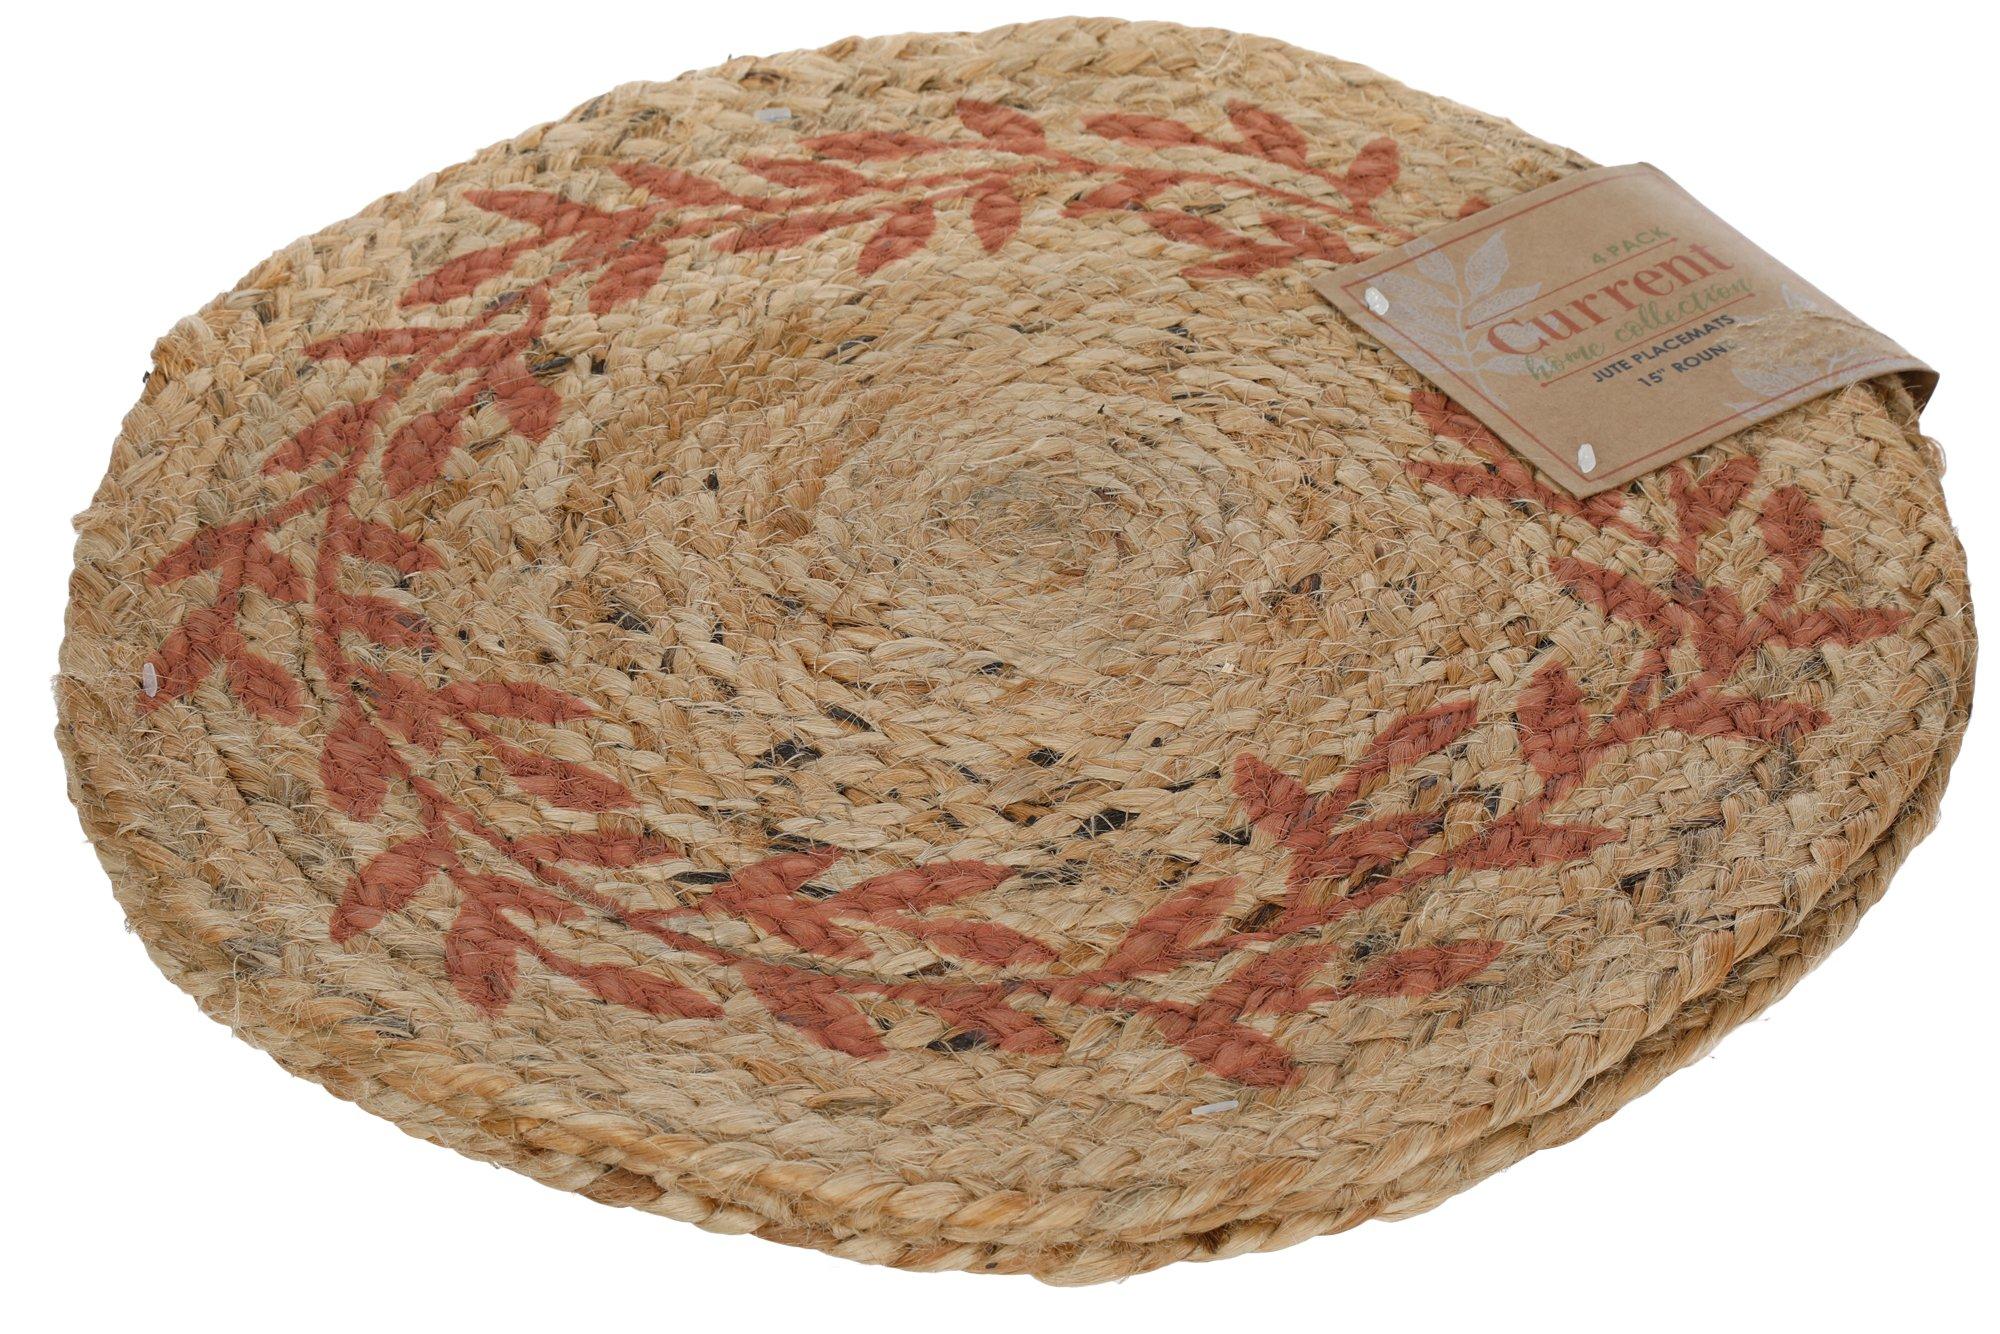 4 Pk Round Placemats - Natural